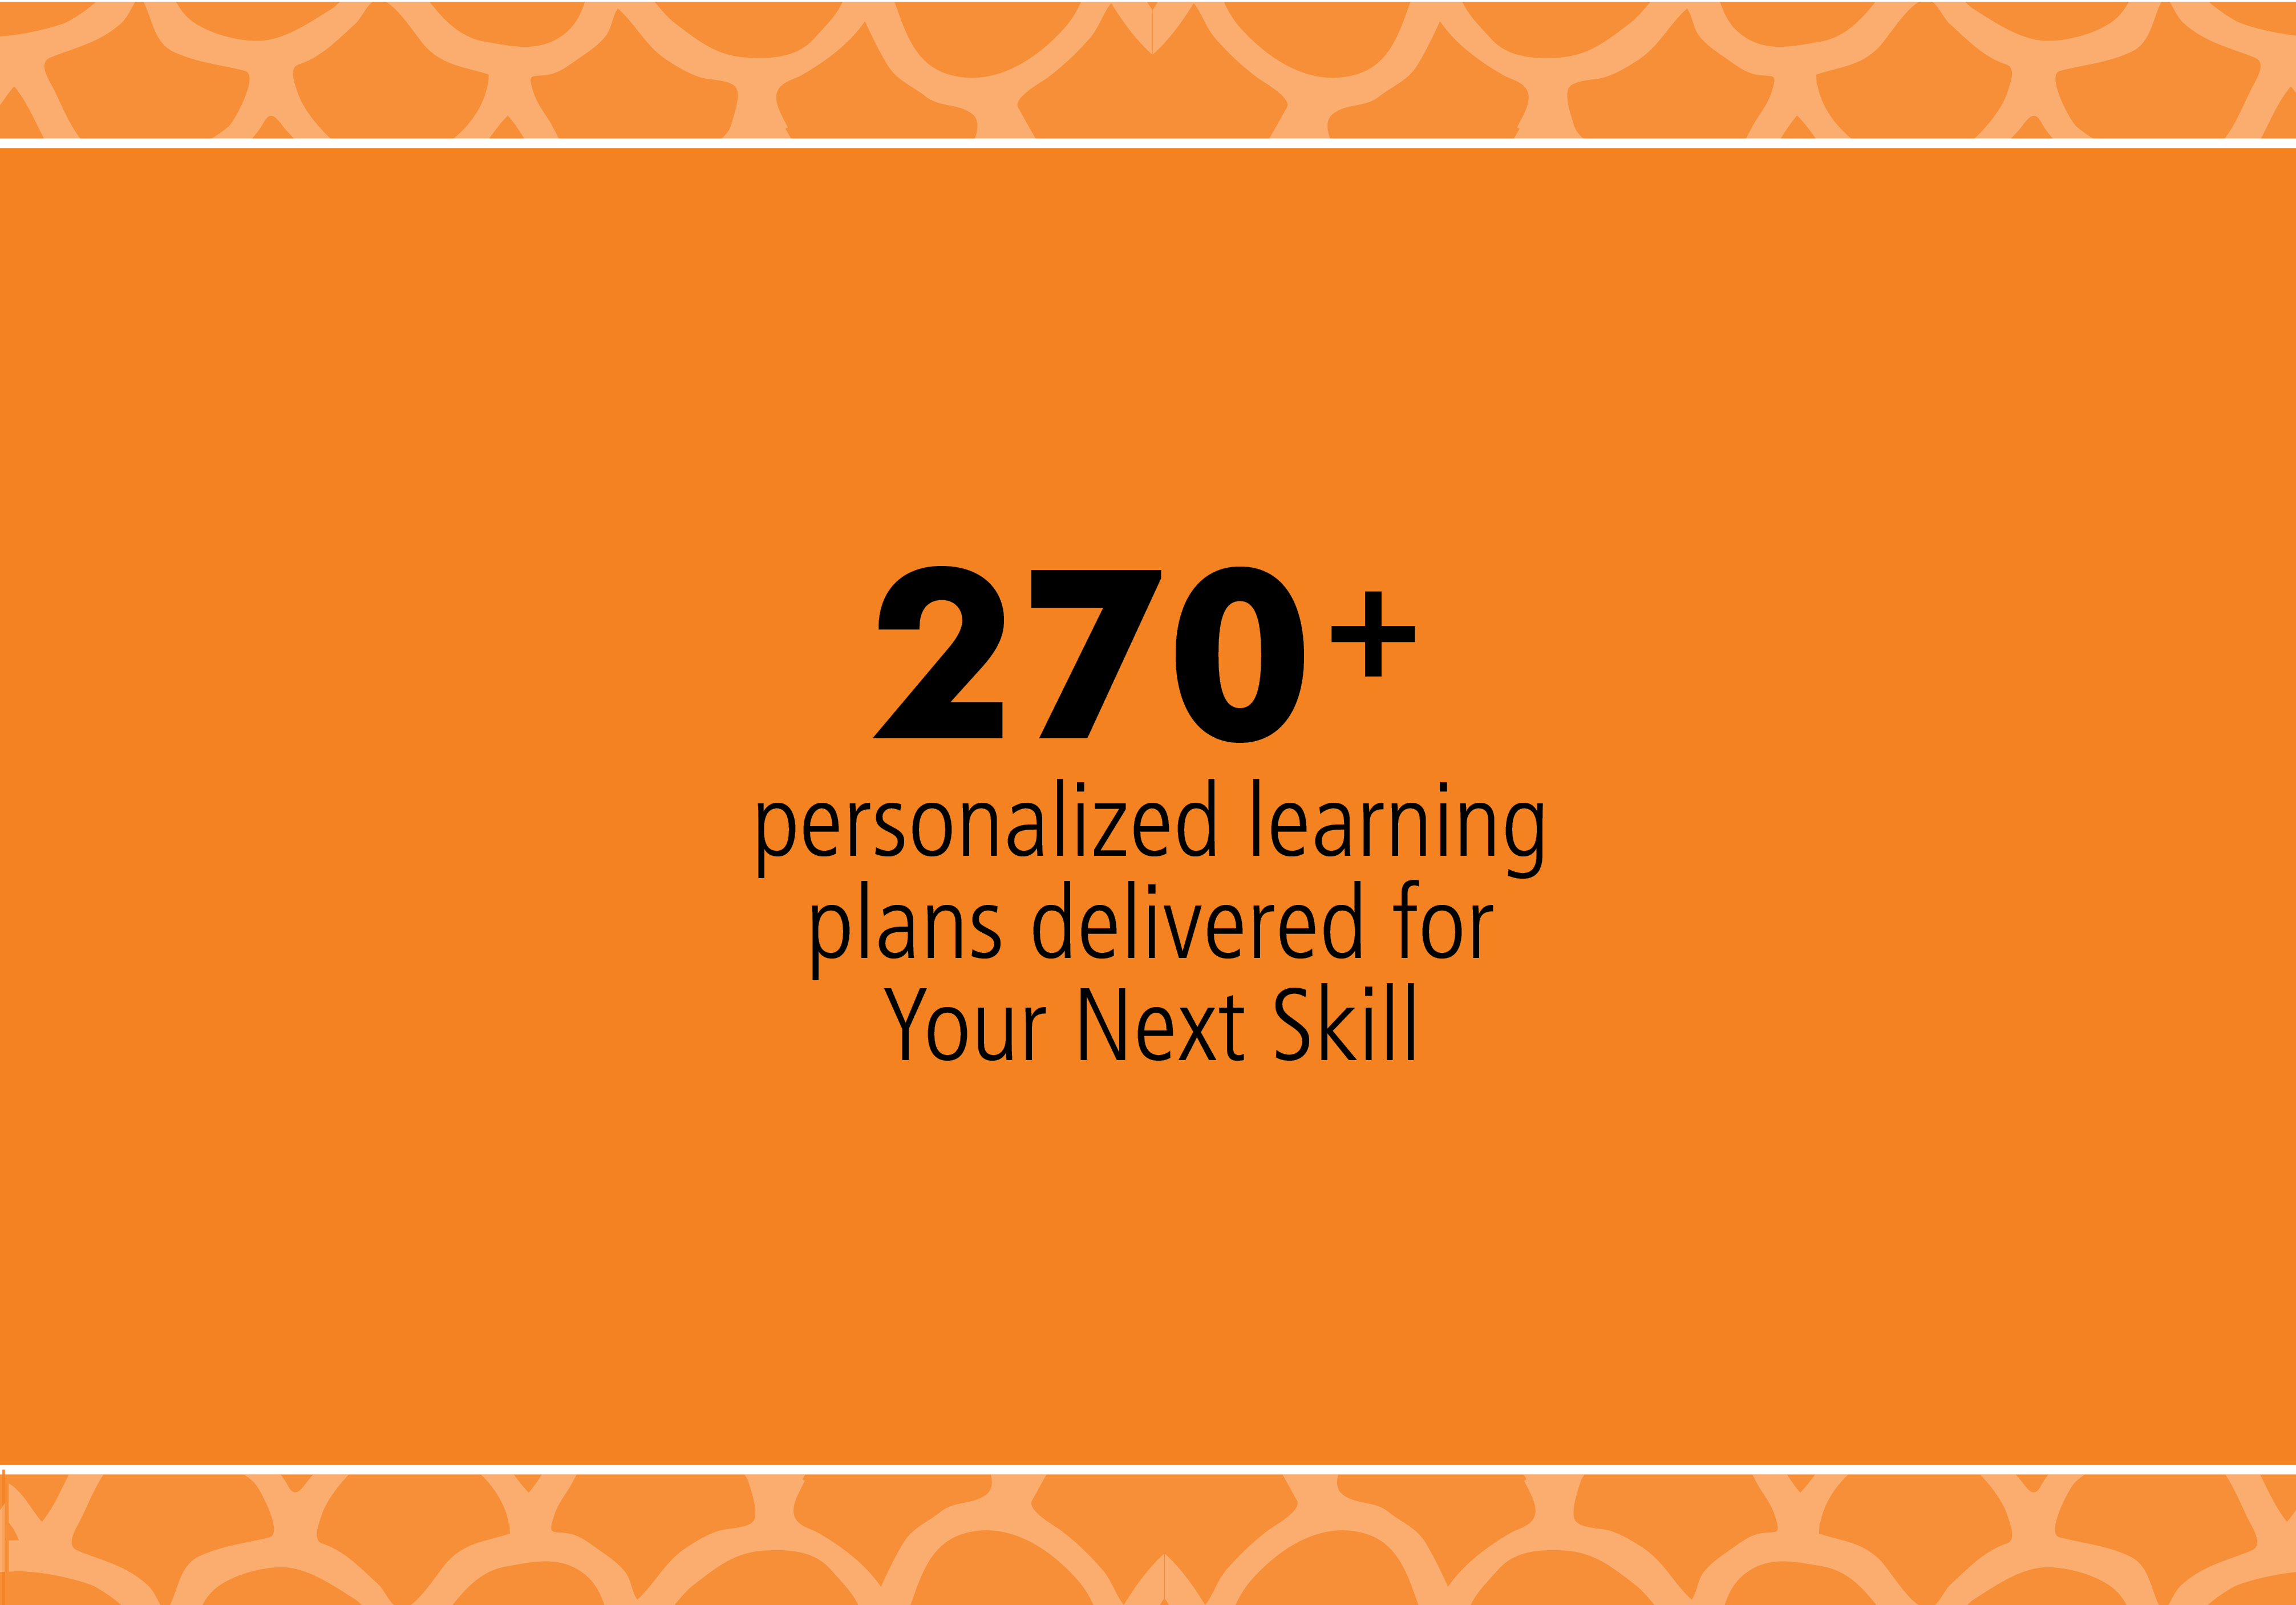 270+ personalized learning plans delivered for Your Next Skill